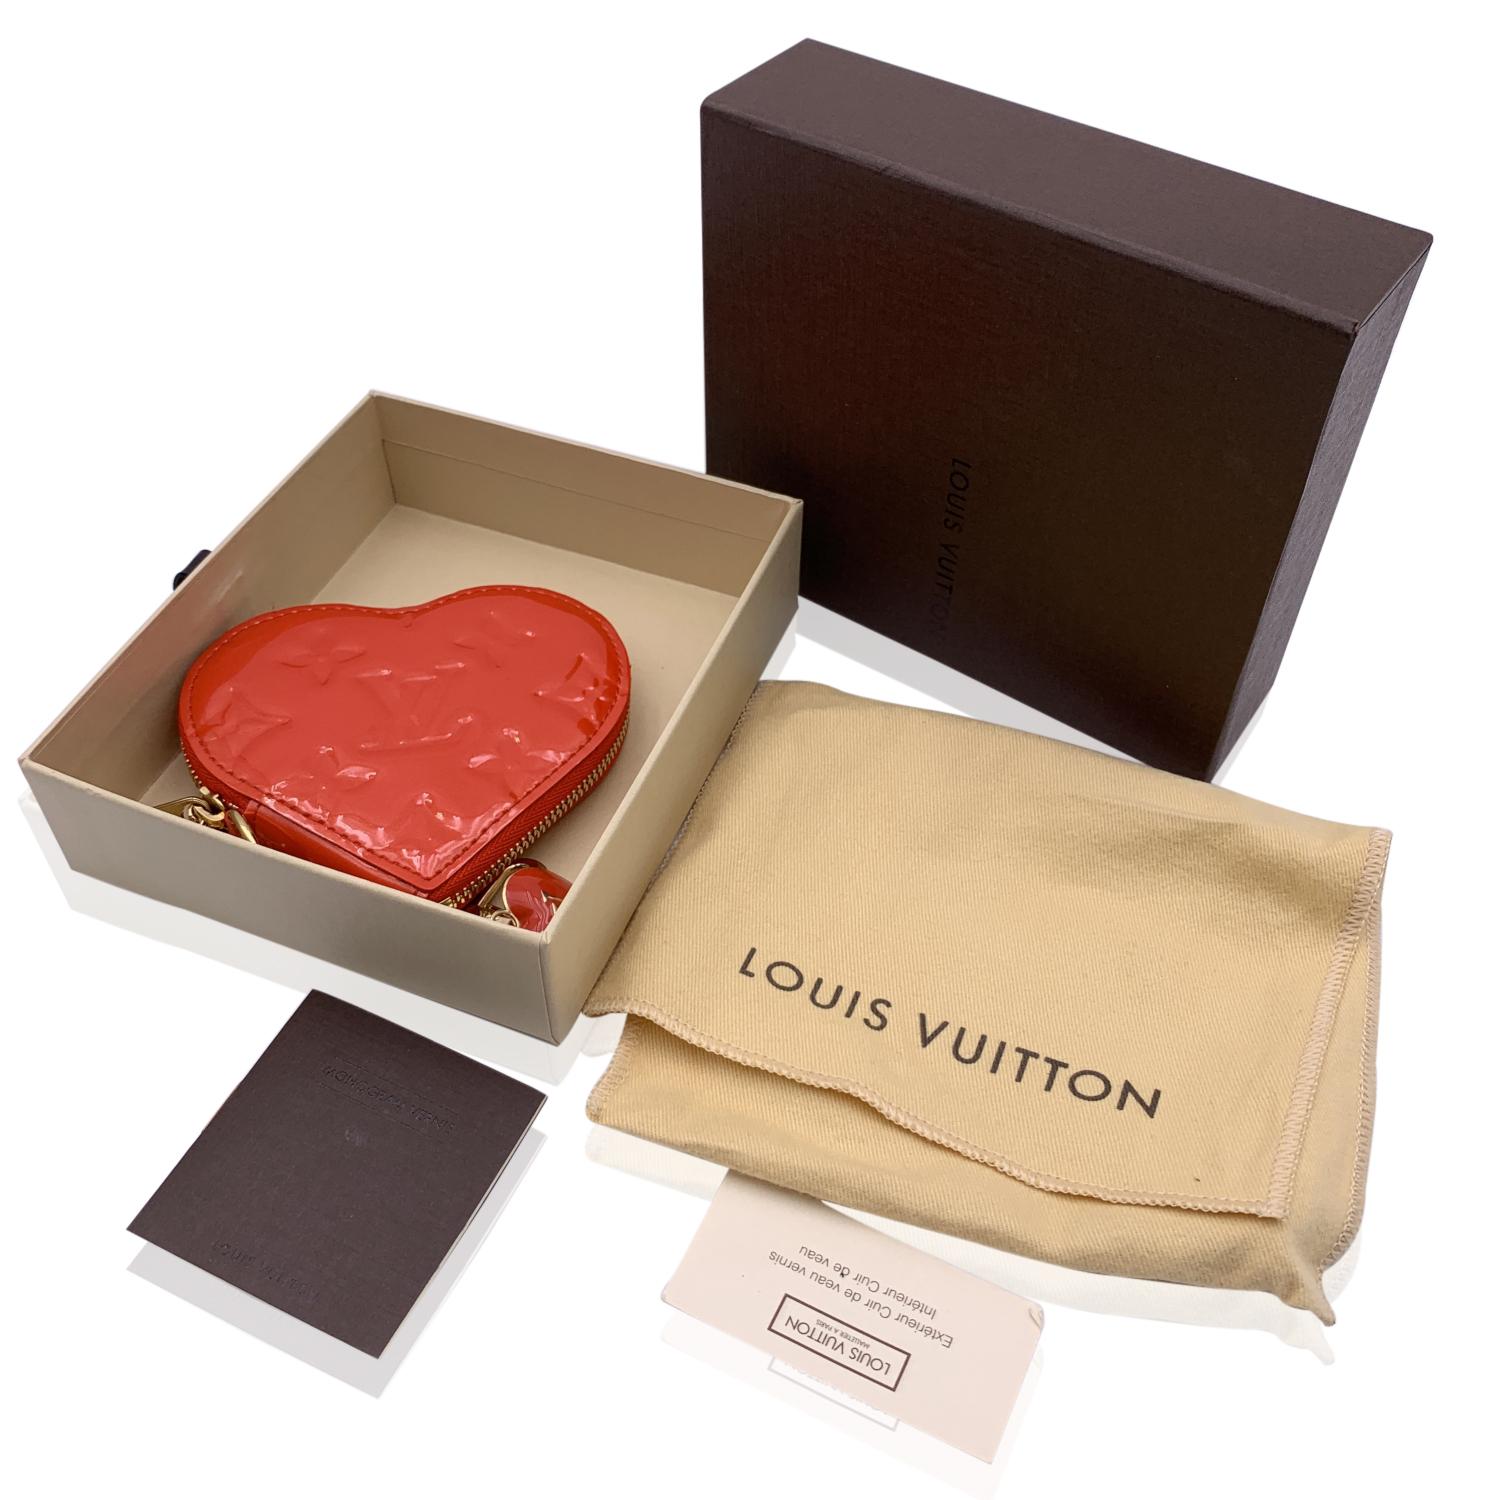 Louis Vuitton red Pomme d'Amour Monogram vernis leather Heart coin purse. Gold metal chain with heart shaped LV charm and a hook closure. Upper zipper closure. 'Louis Vuitton Paris - made in france' engraved on leather inside. Authenticity serial